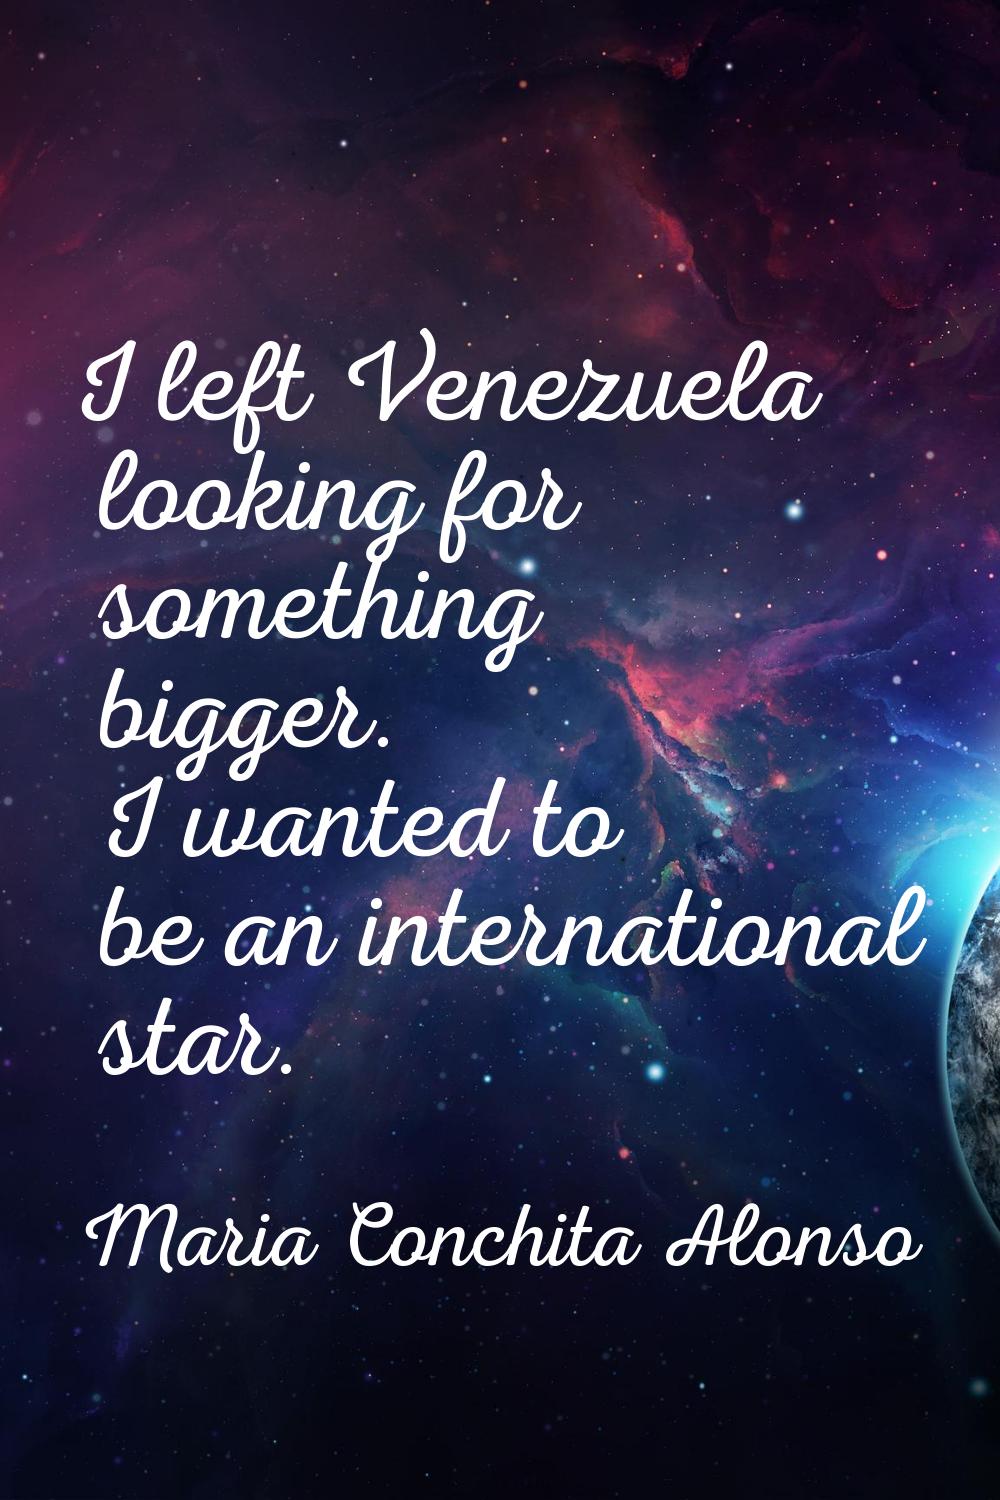 I left Venezuela looking for something bigger. I wanted to be an international star.